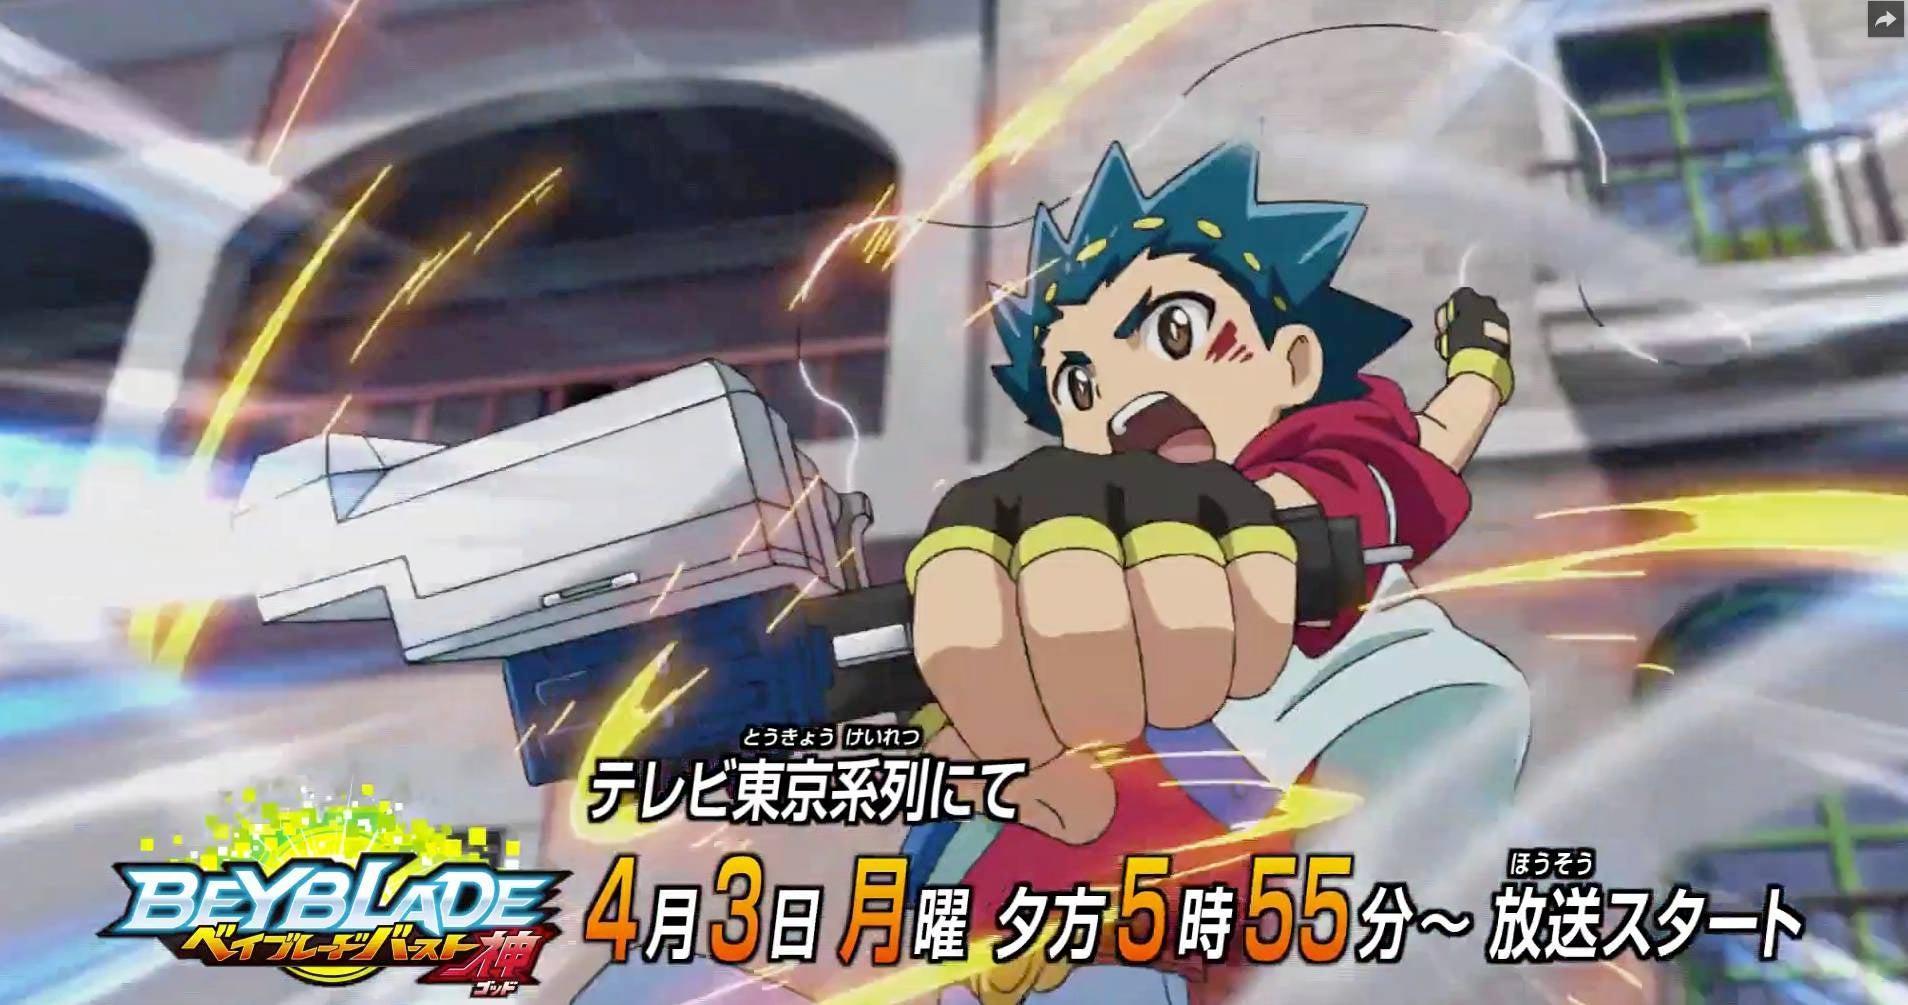 Beyblade Is Back With A New Preview